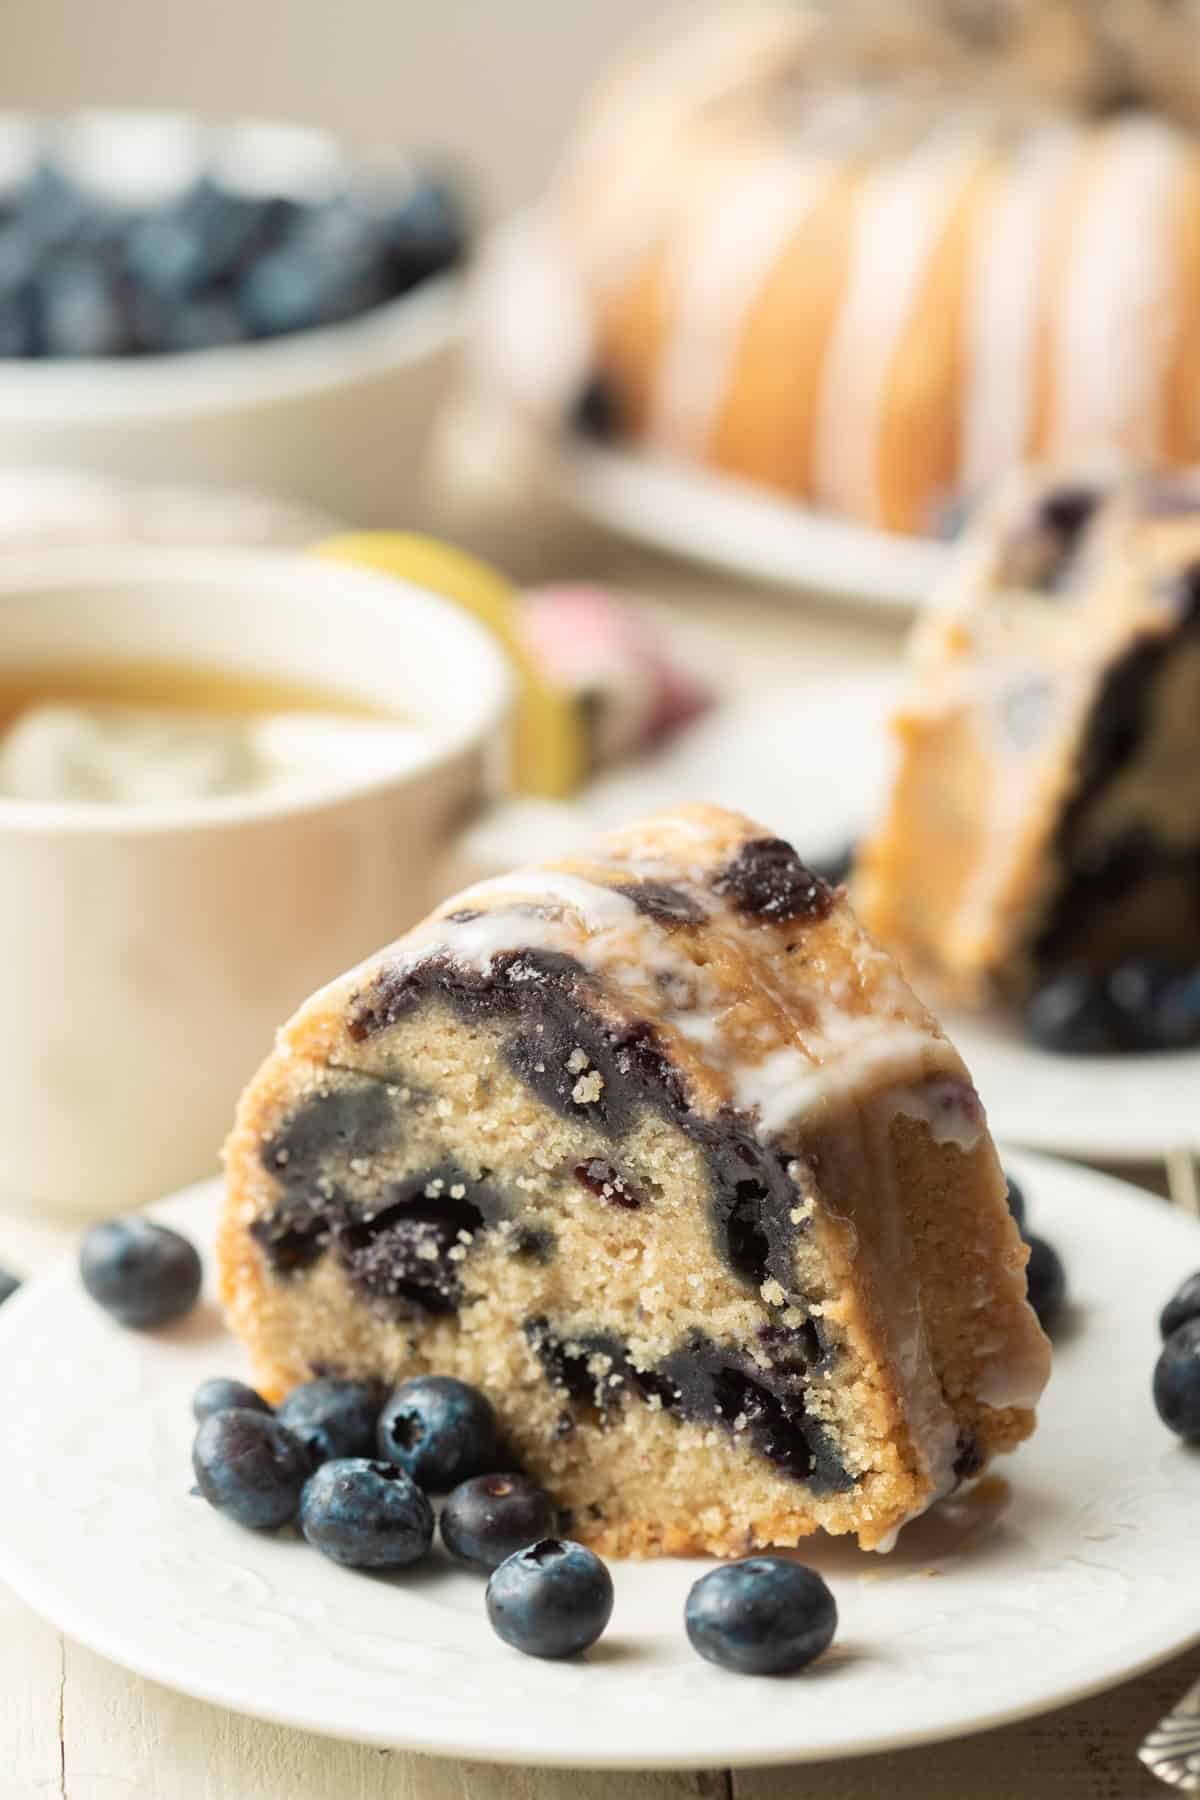 Slice of Vegan Blueberry Cake on a plate with tea cup and cake in the background.